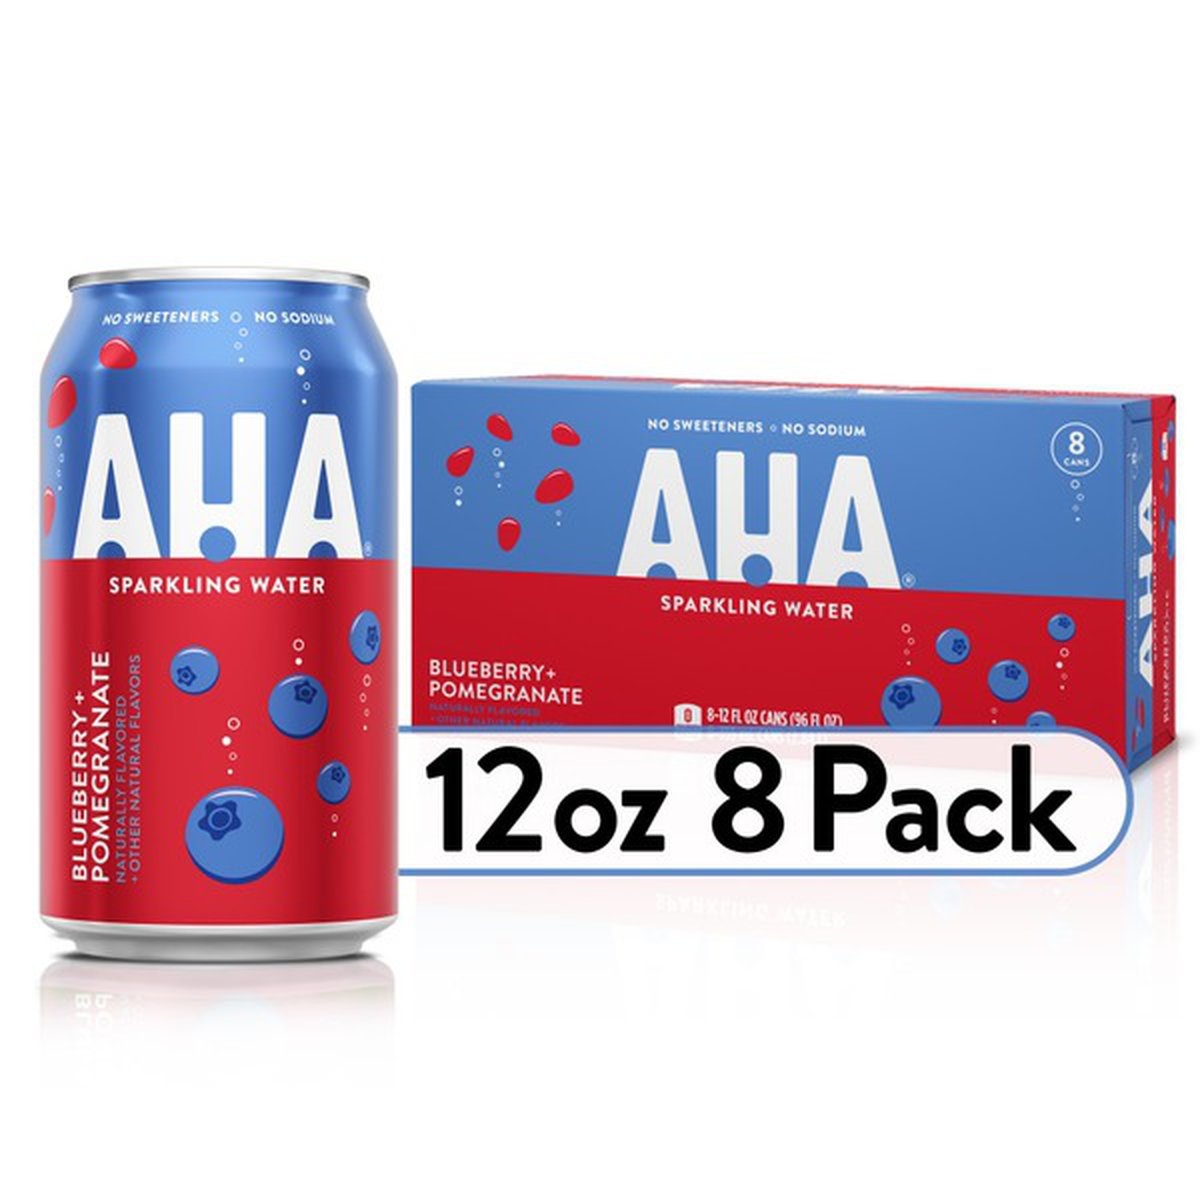 slide 1 of 1, Aha Sparkling Water, Blueberry Pomegranate Flavored Water, Zero Calories, Sodium Free, No Sweeteners, 8 ct; 12 oz